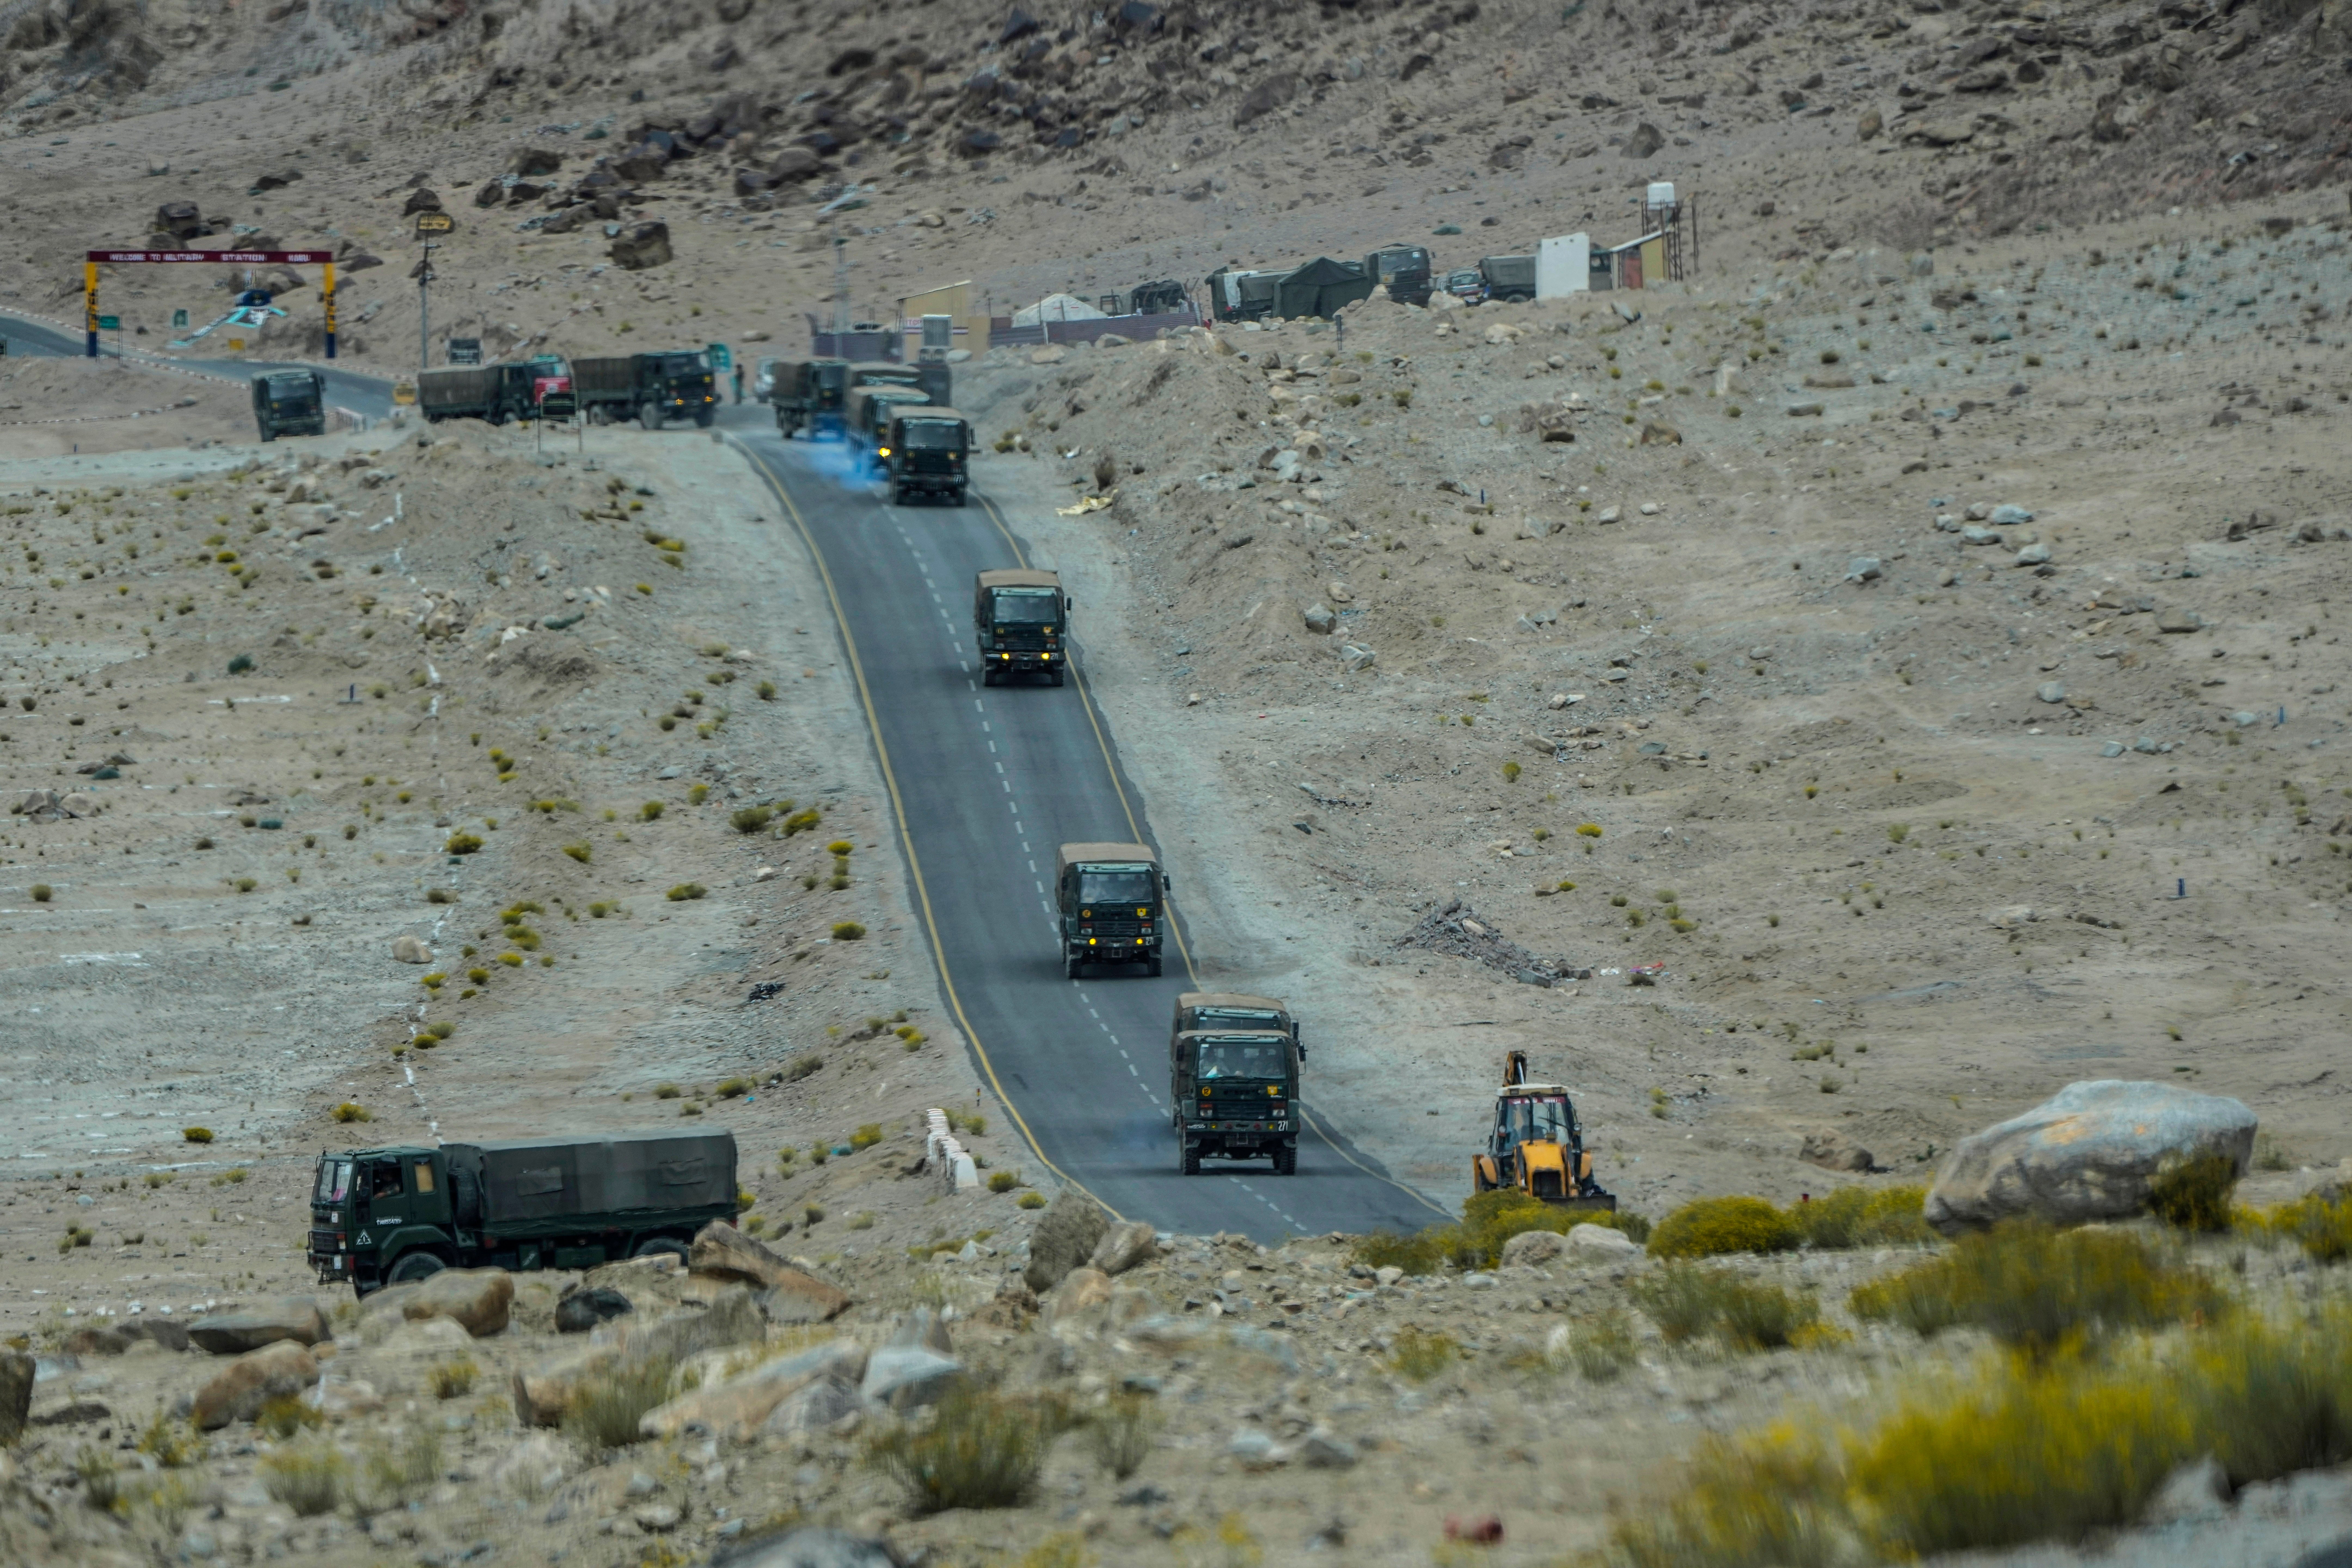 Indian army vehicles move in a convoy in the cold desert region of Ladakh, India on Tuesday